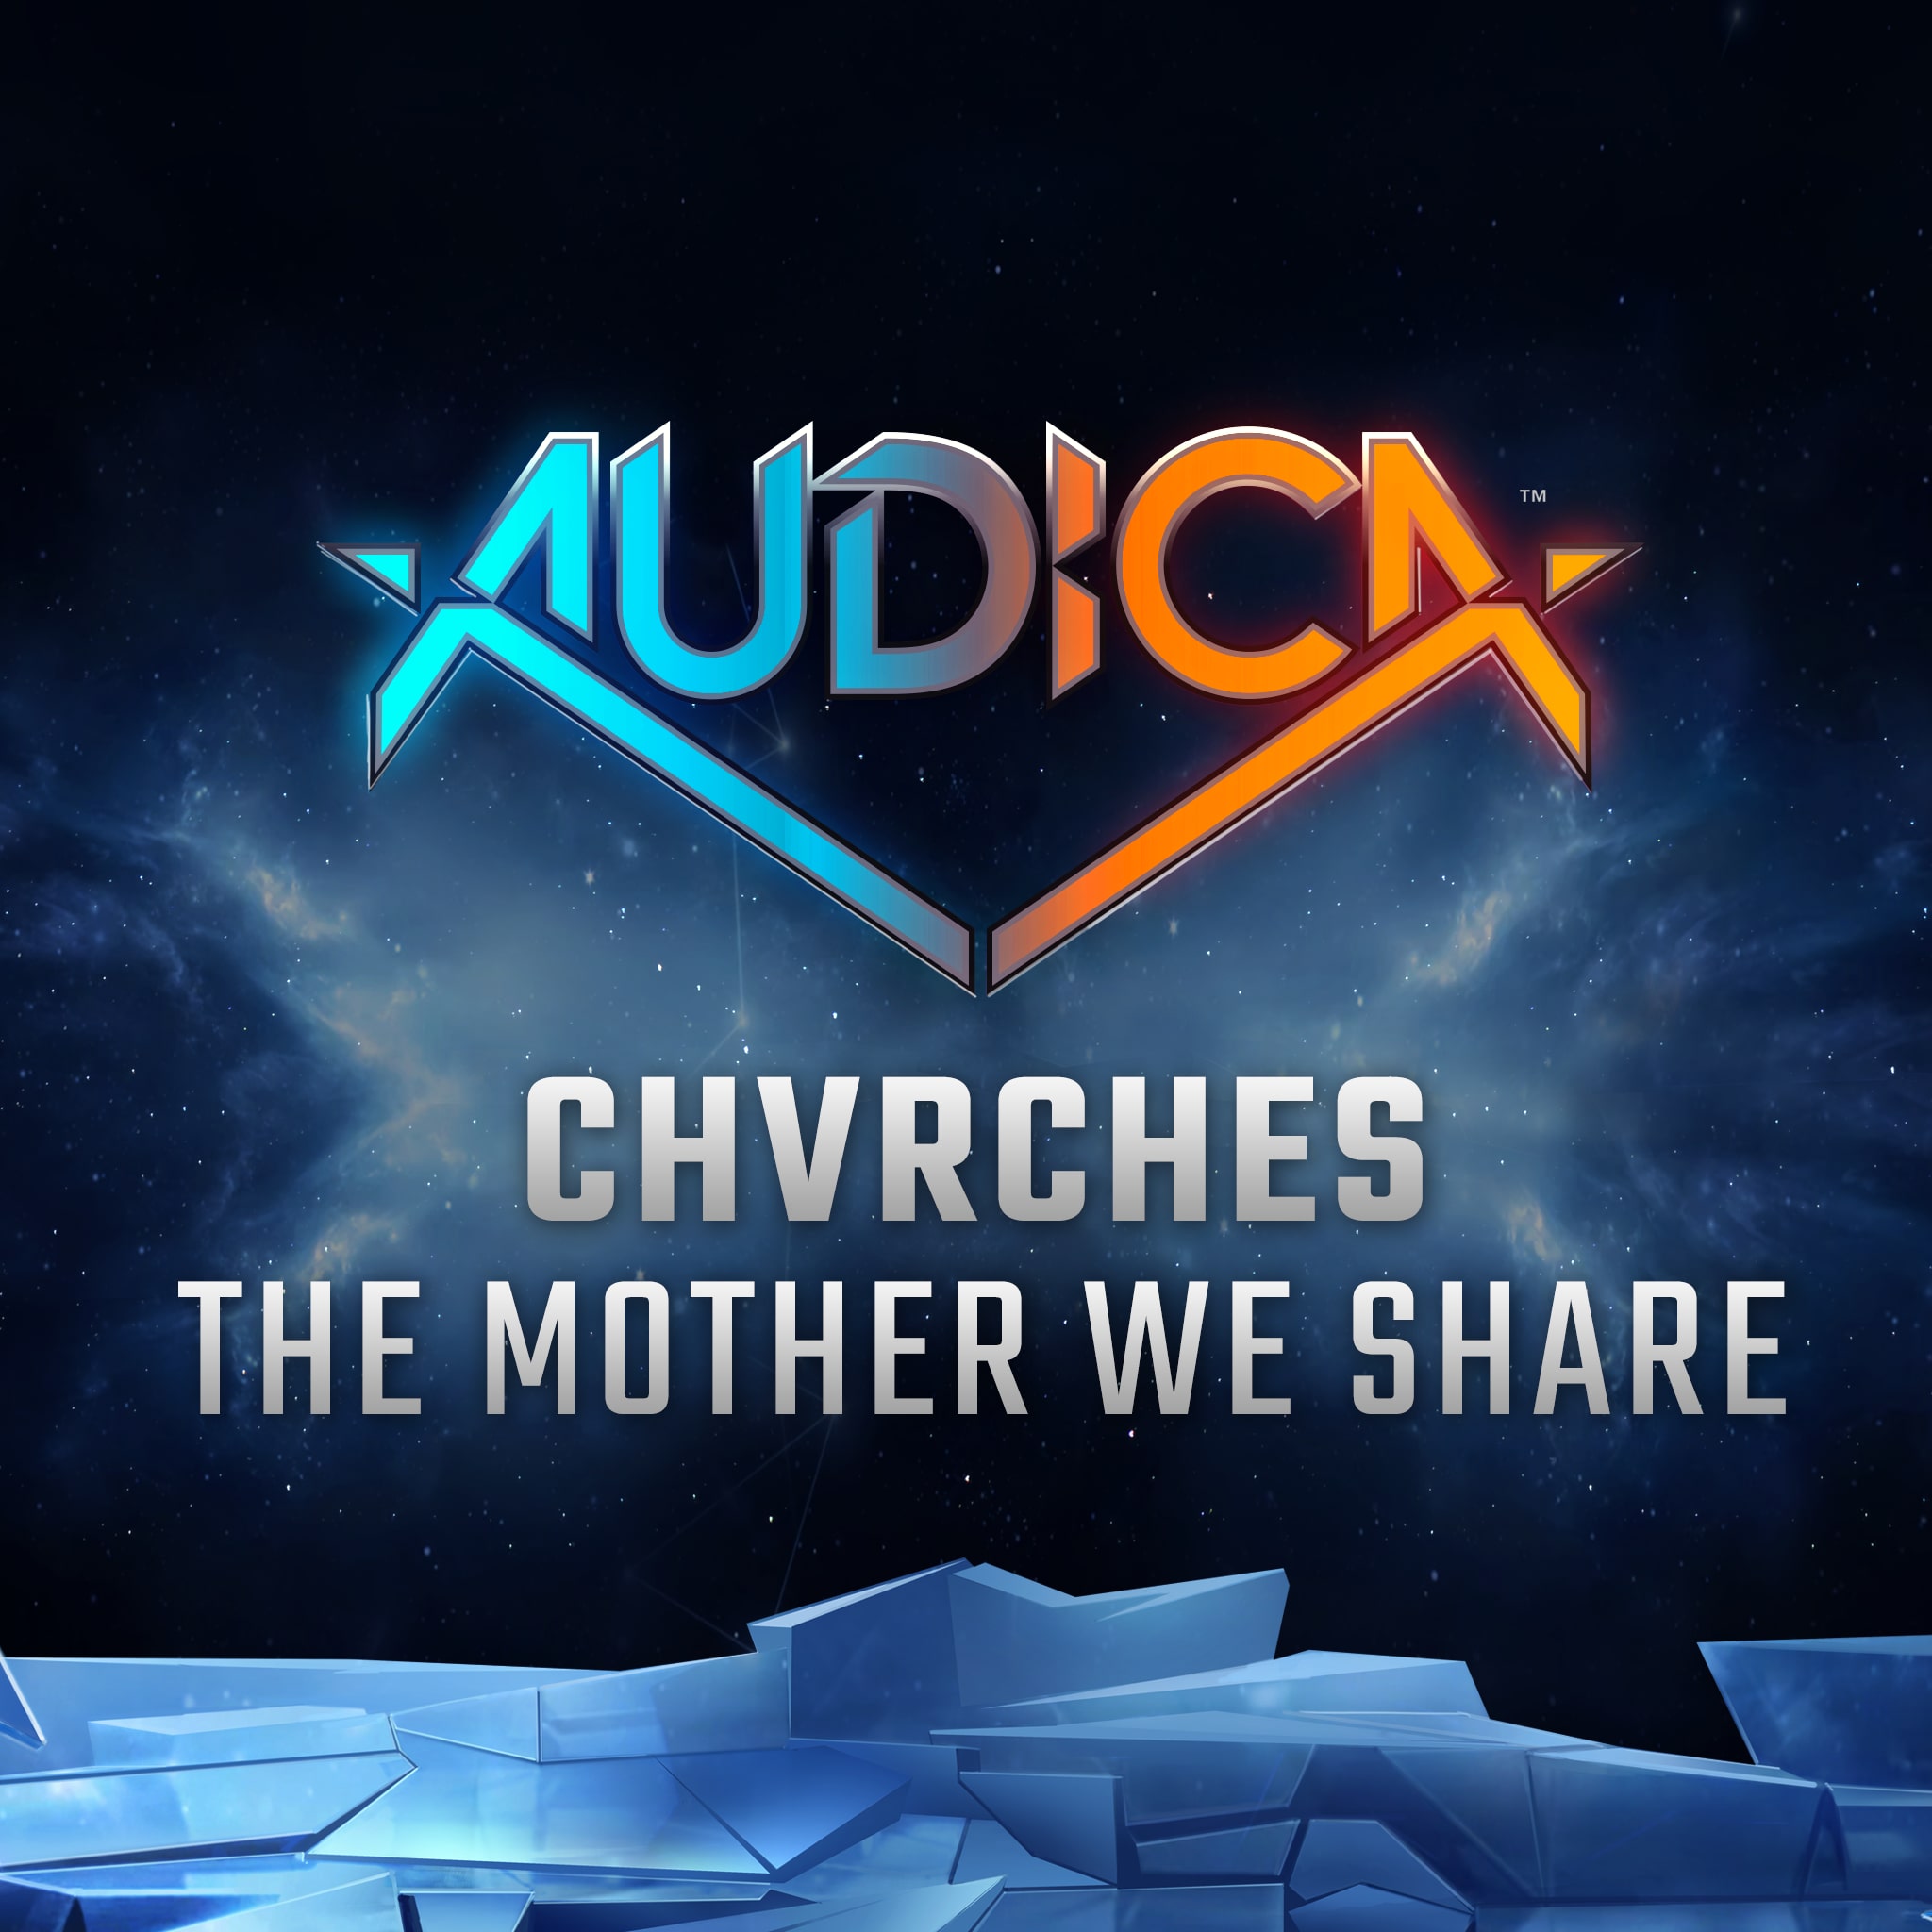 'The Mother We Share' - CHVRCHES